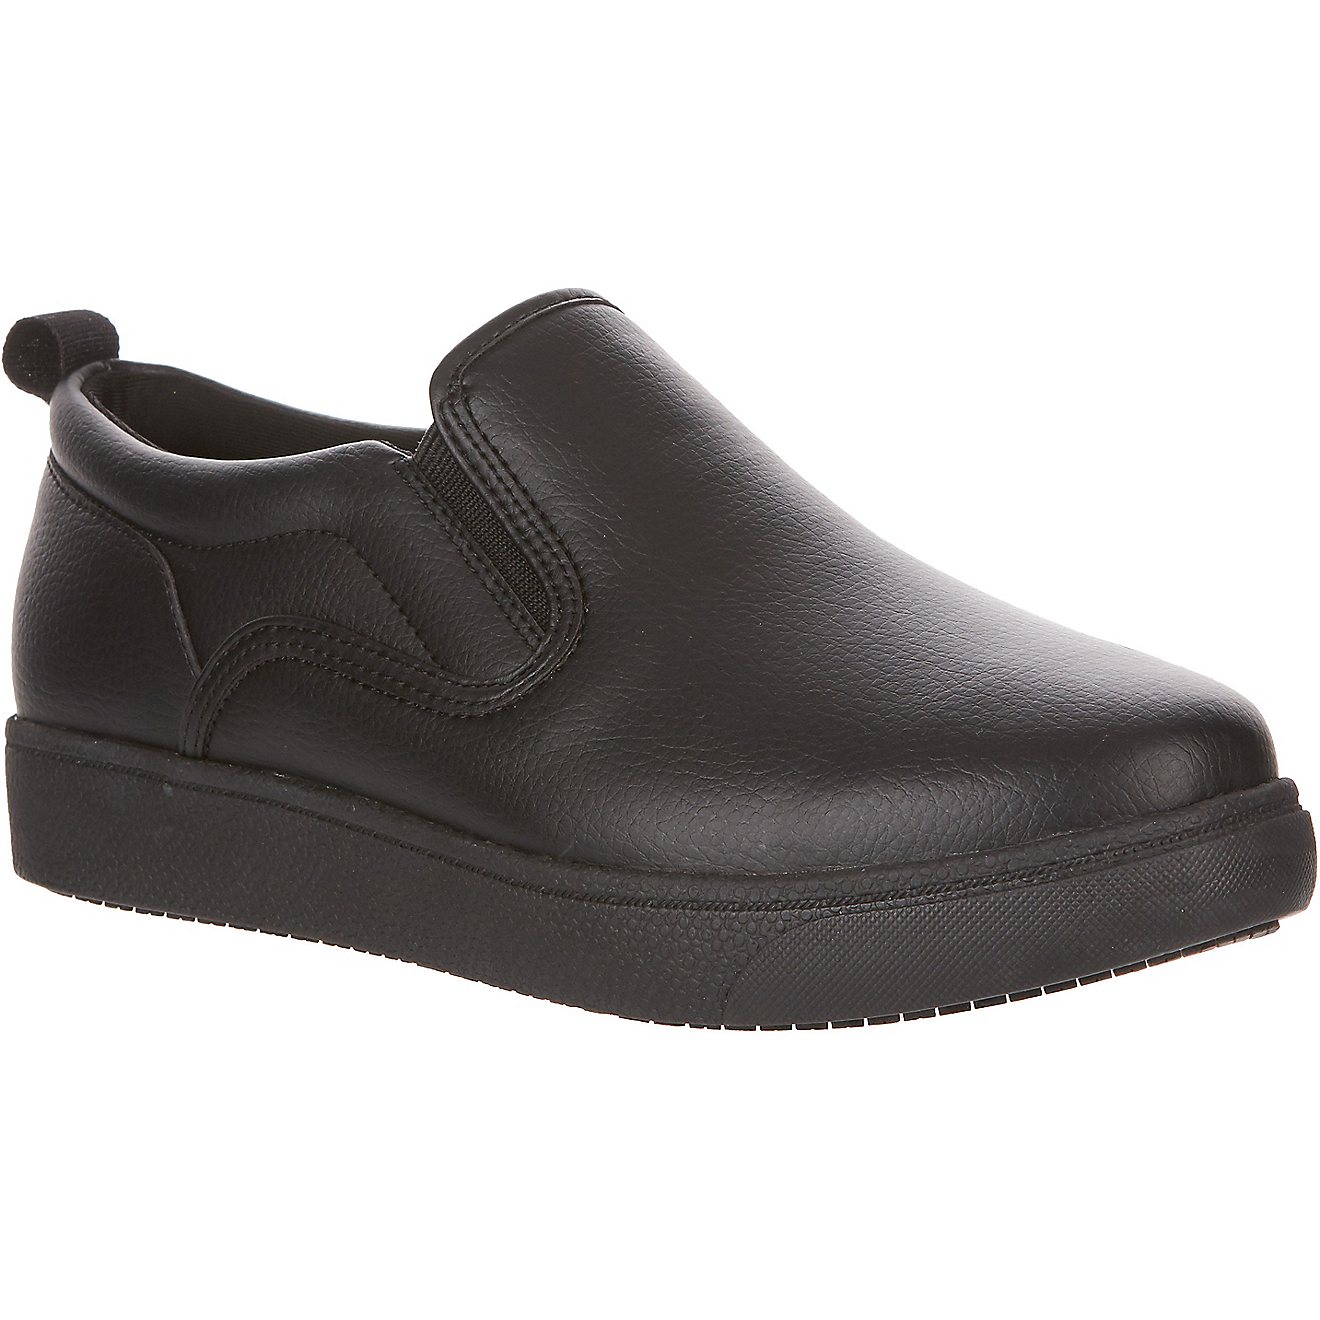 Brazos Men's All Comfort Slip-On Service Shoes                                                                                   - view number 2